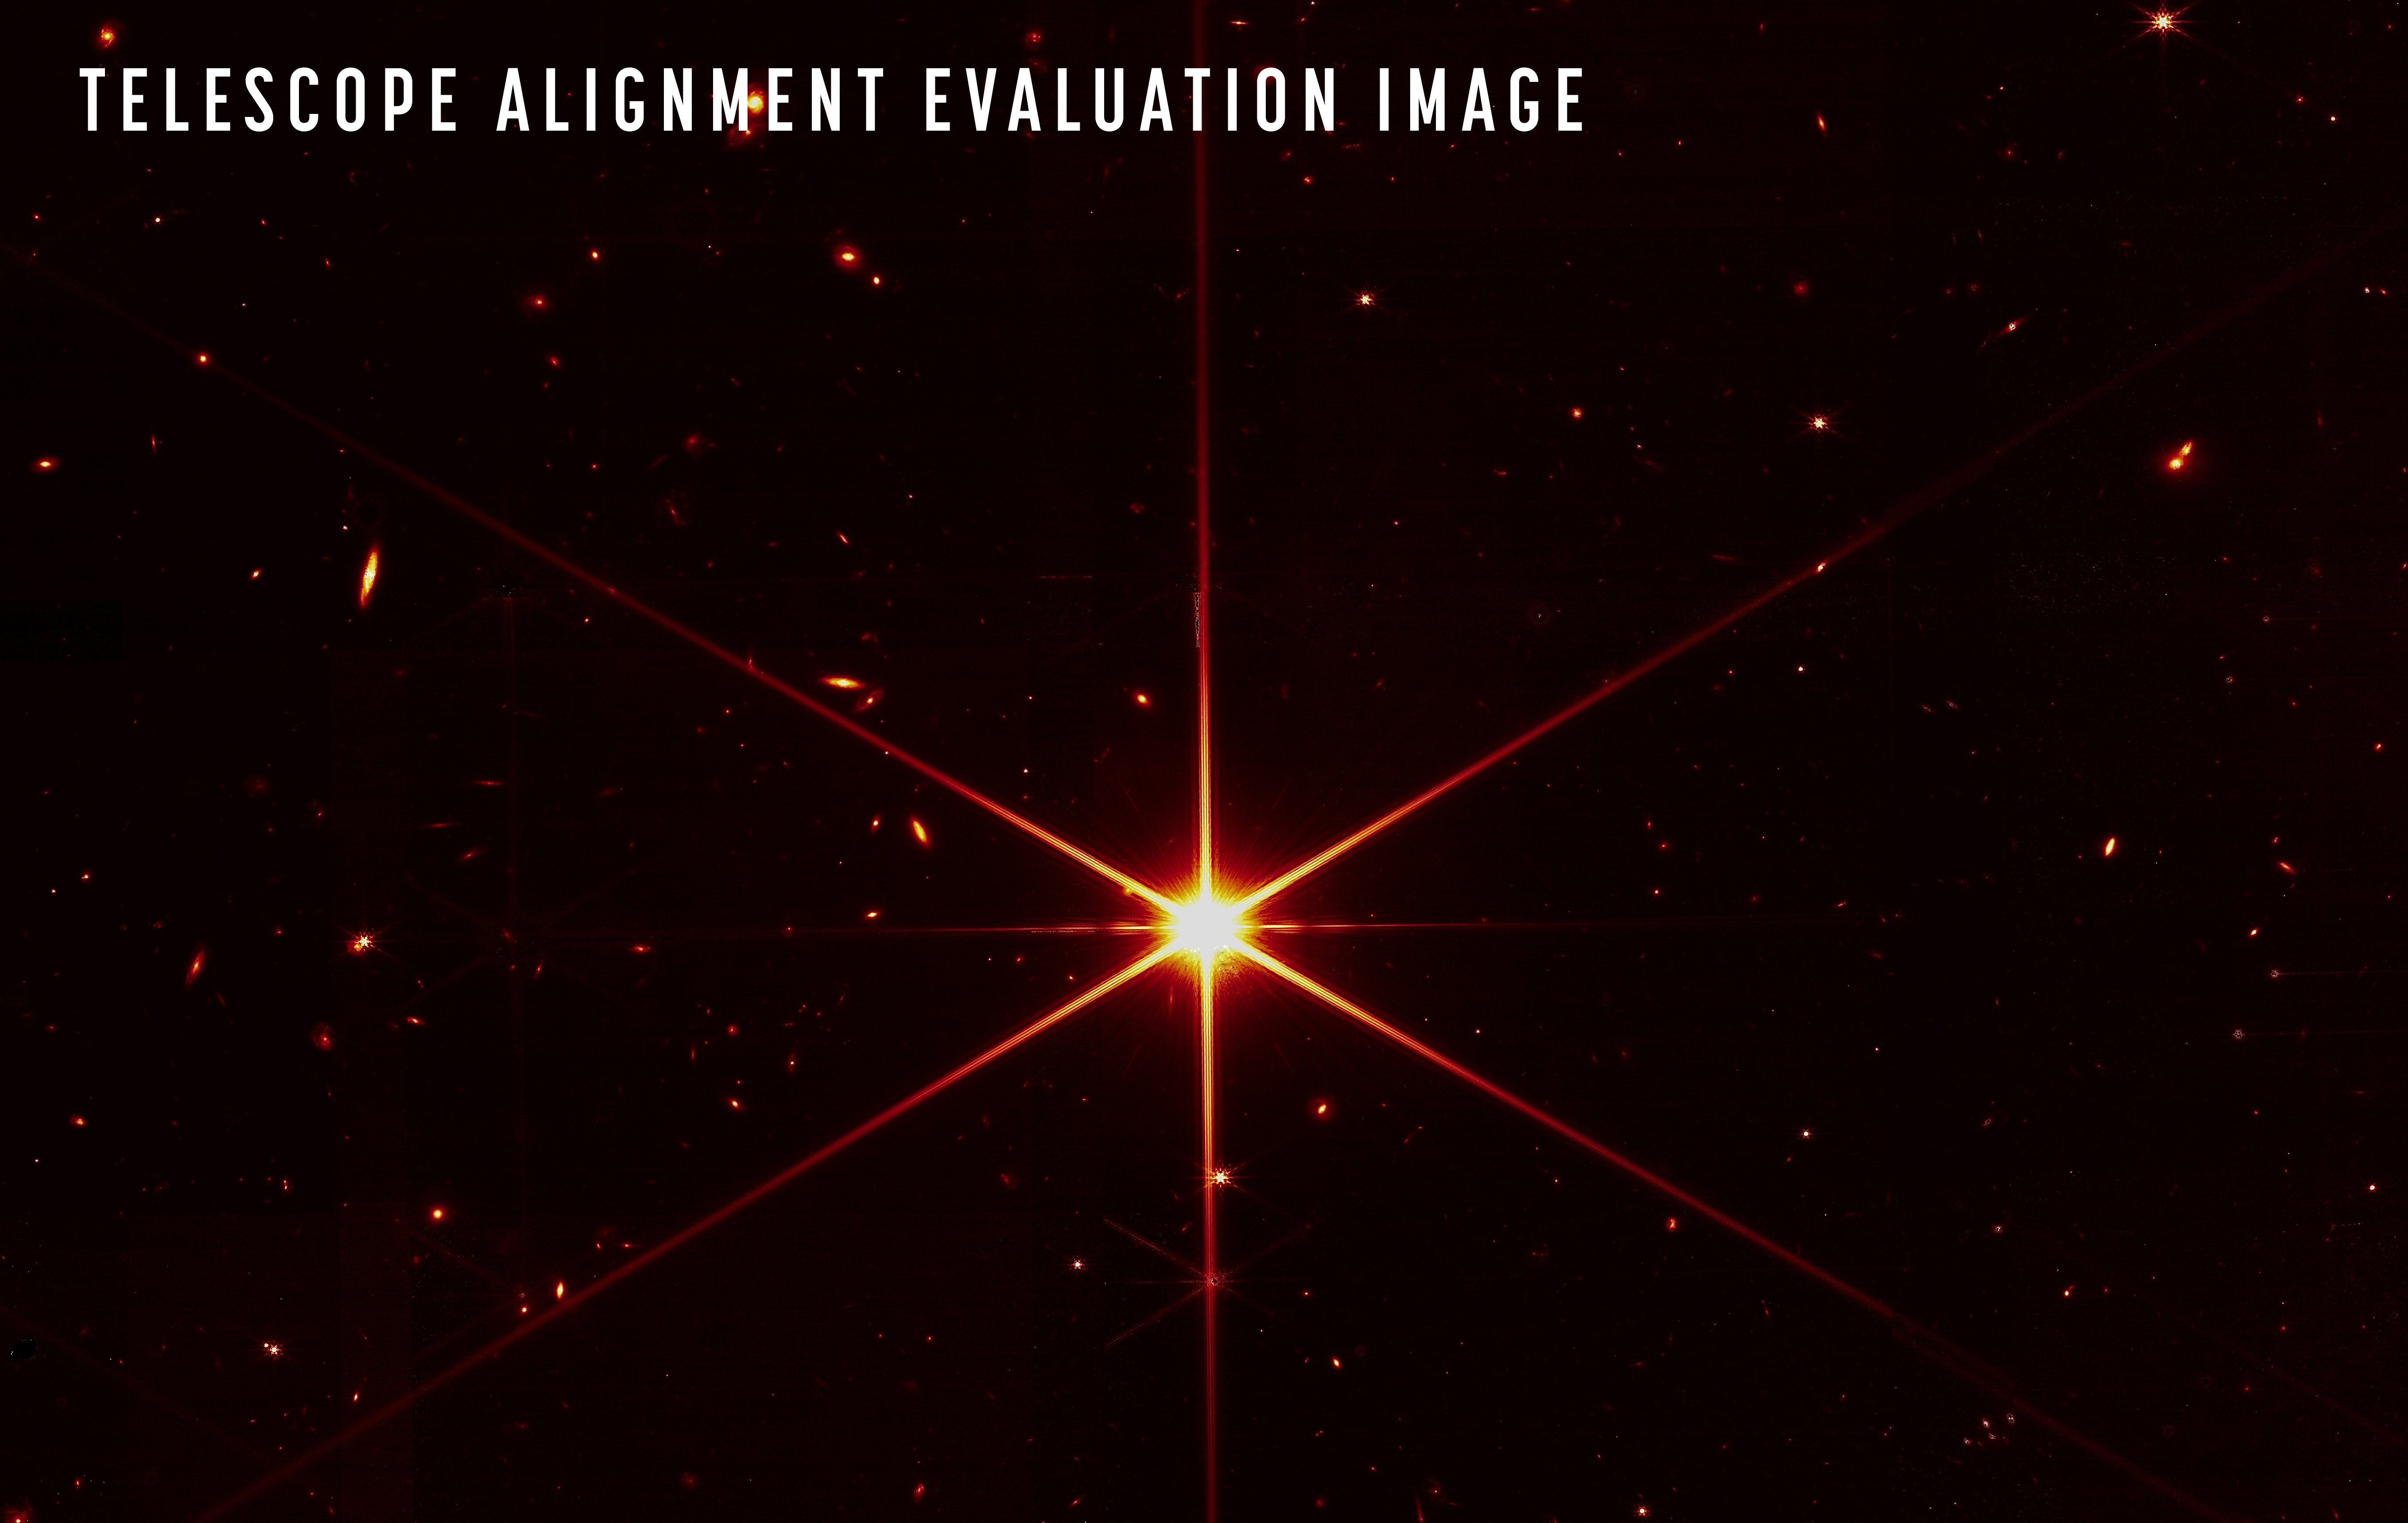 telescope_alignment_evaluation_image_labeled.png